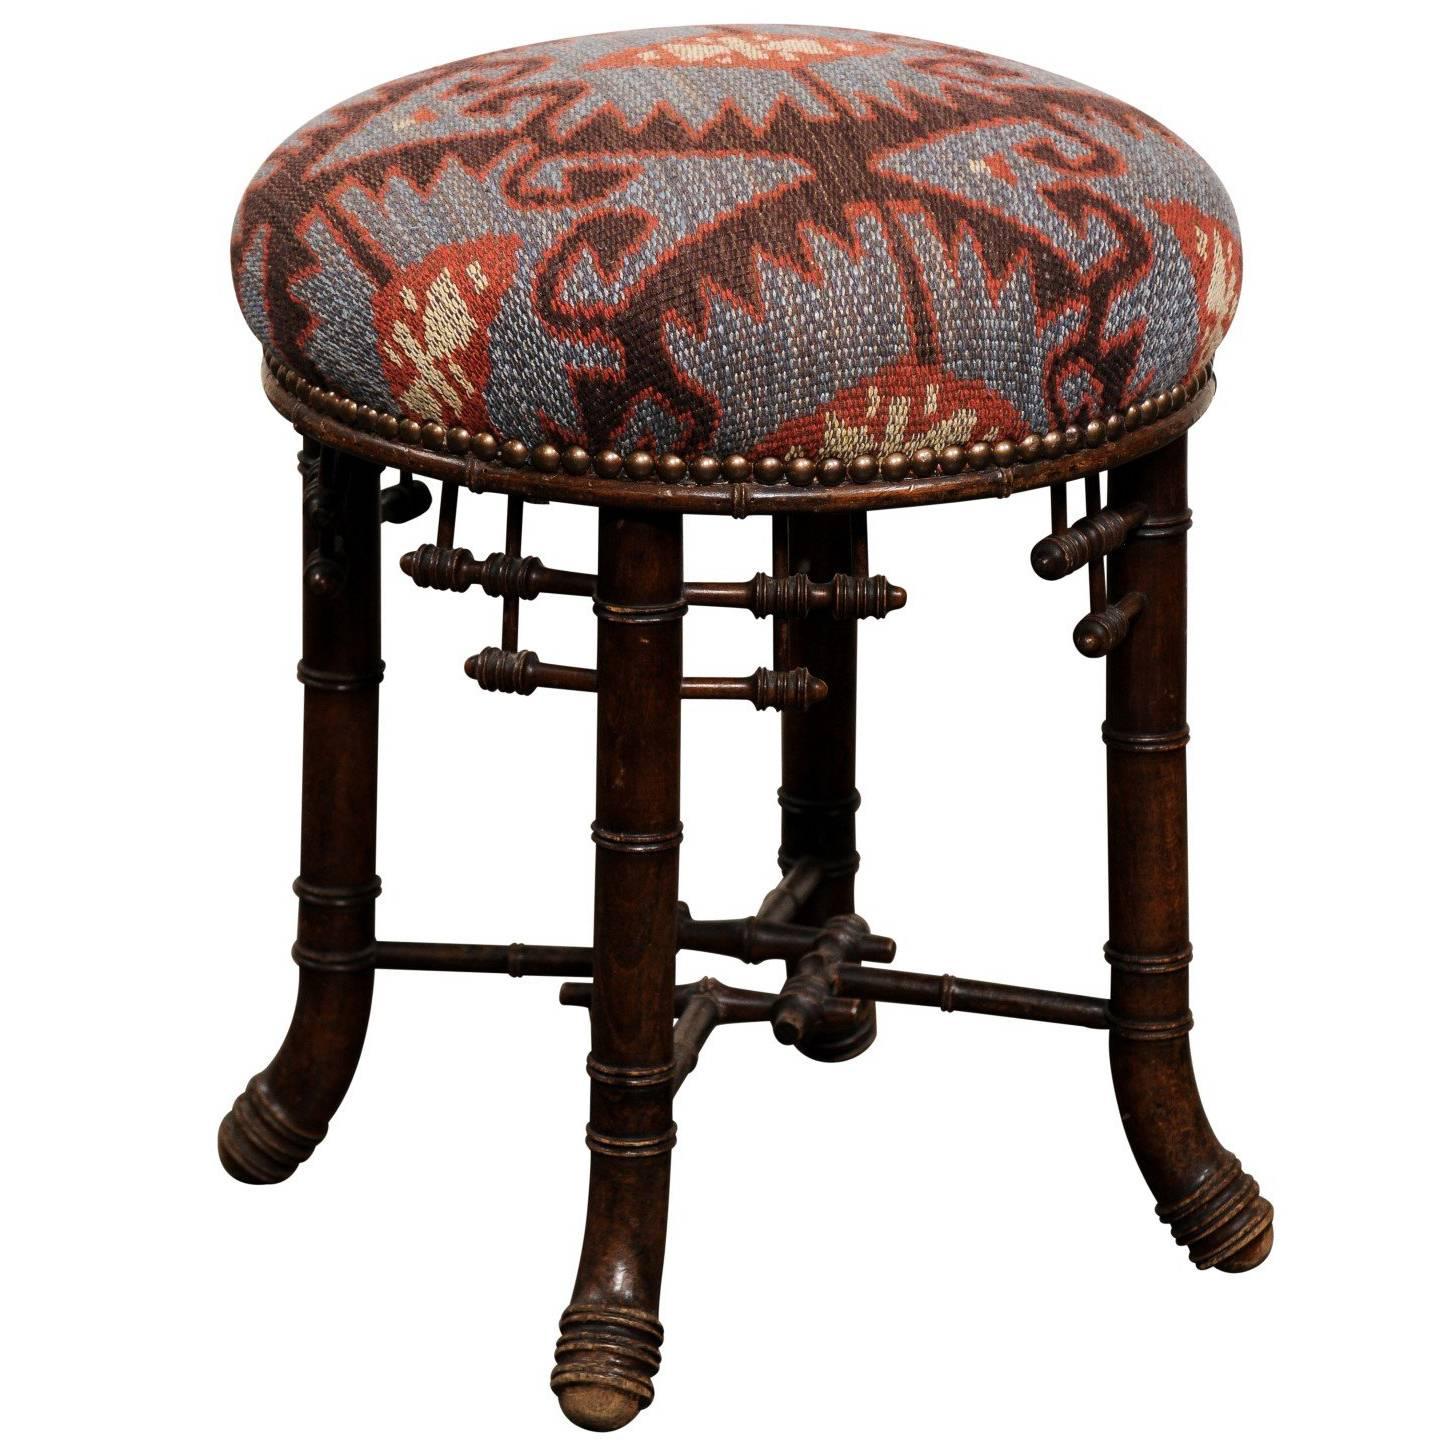 French Chinese Chippendale Style Upholstered Stool from the Turn of the Century